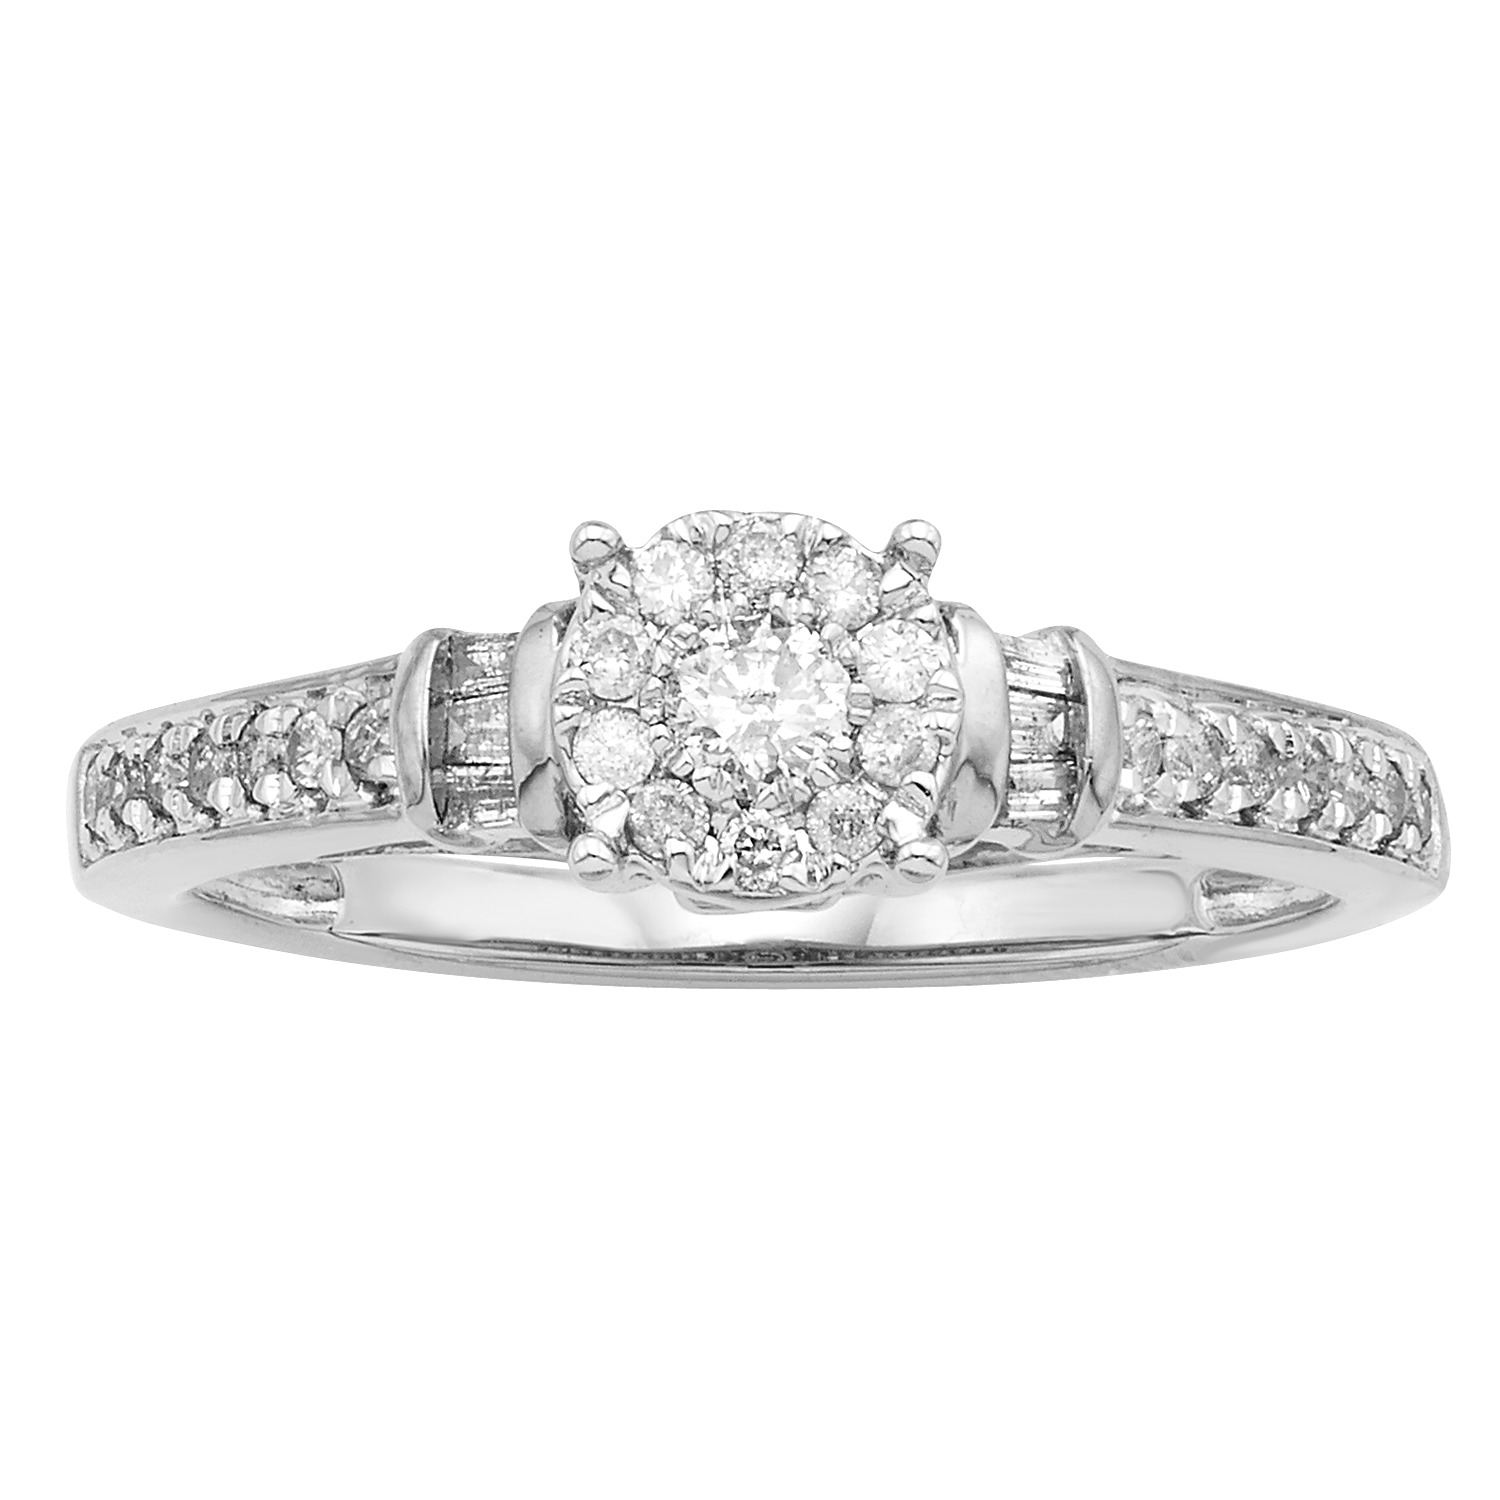 Tradition Diamond 10K White Gold 1/3 cttw. Certified Diamond Ring - Size 7 Only